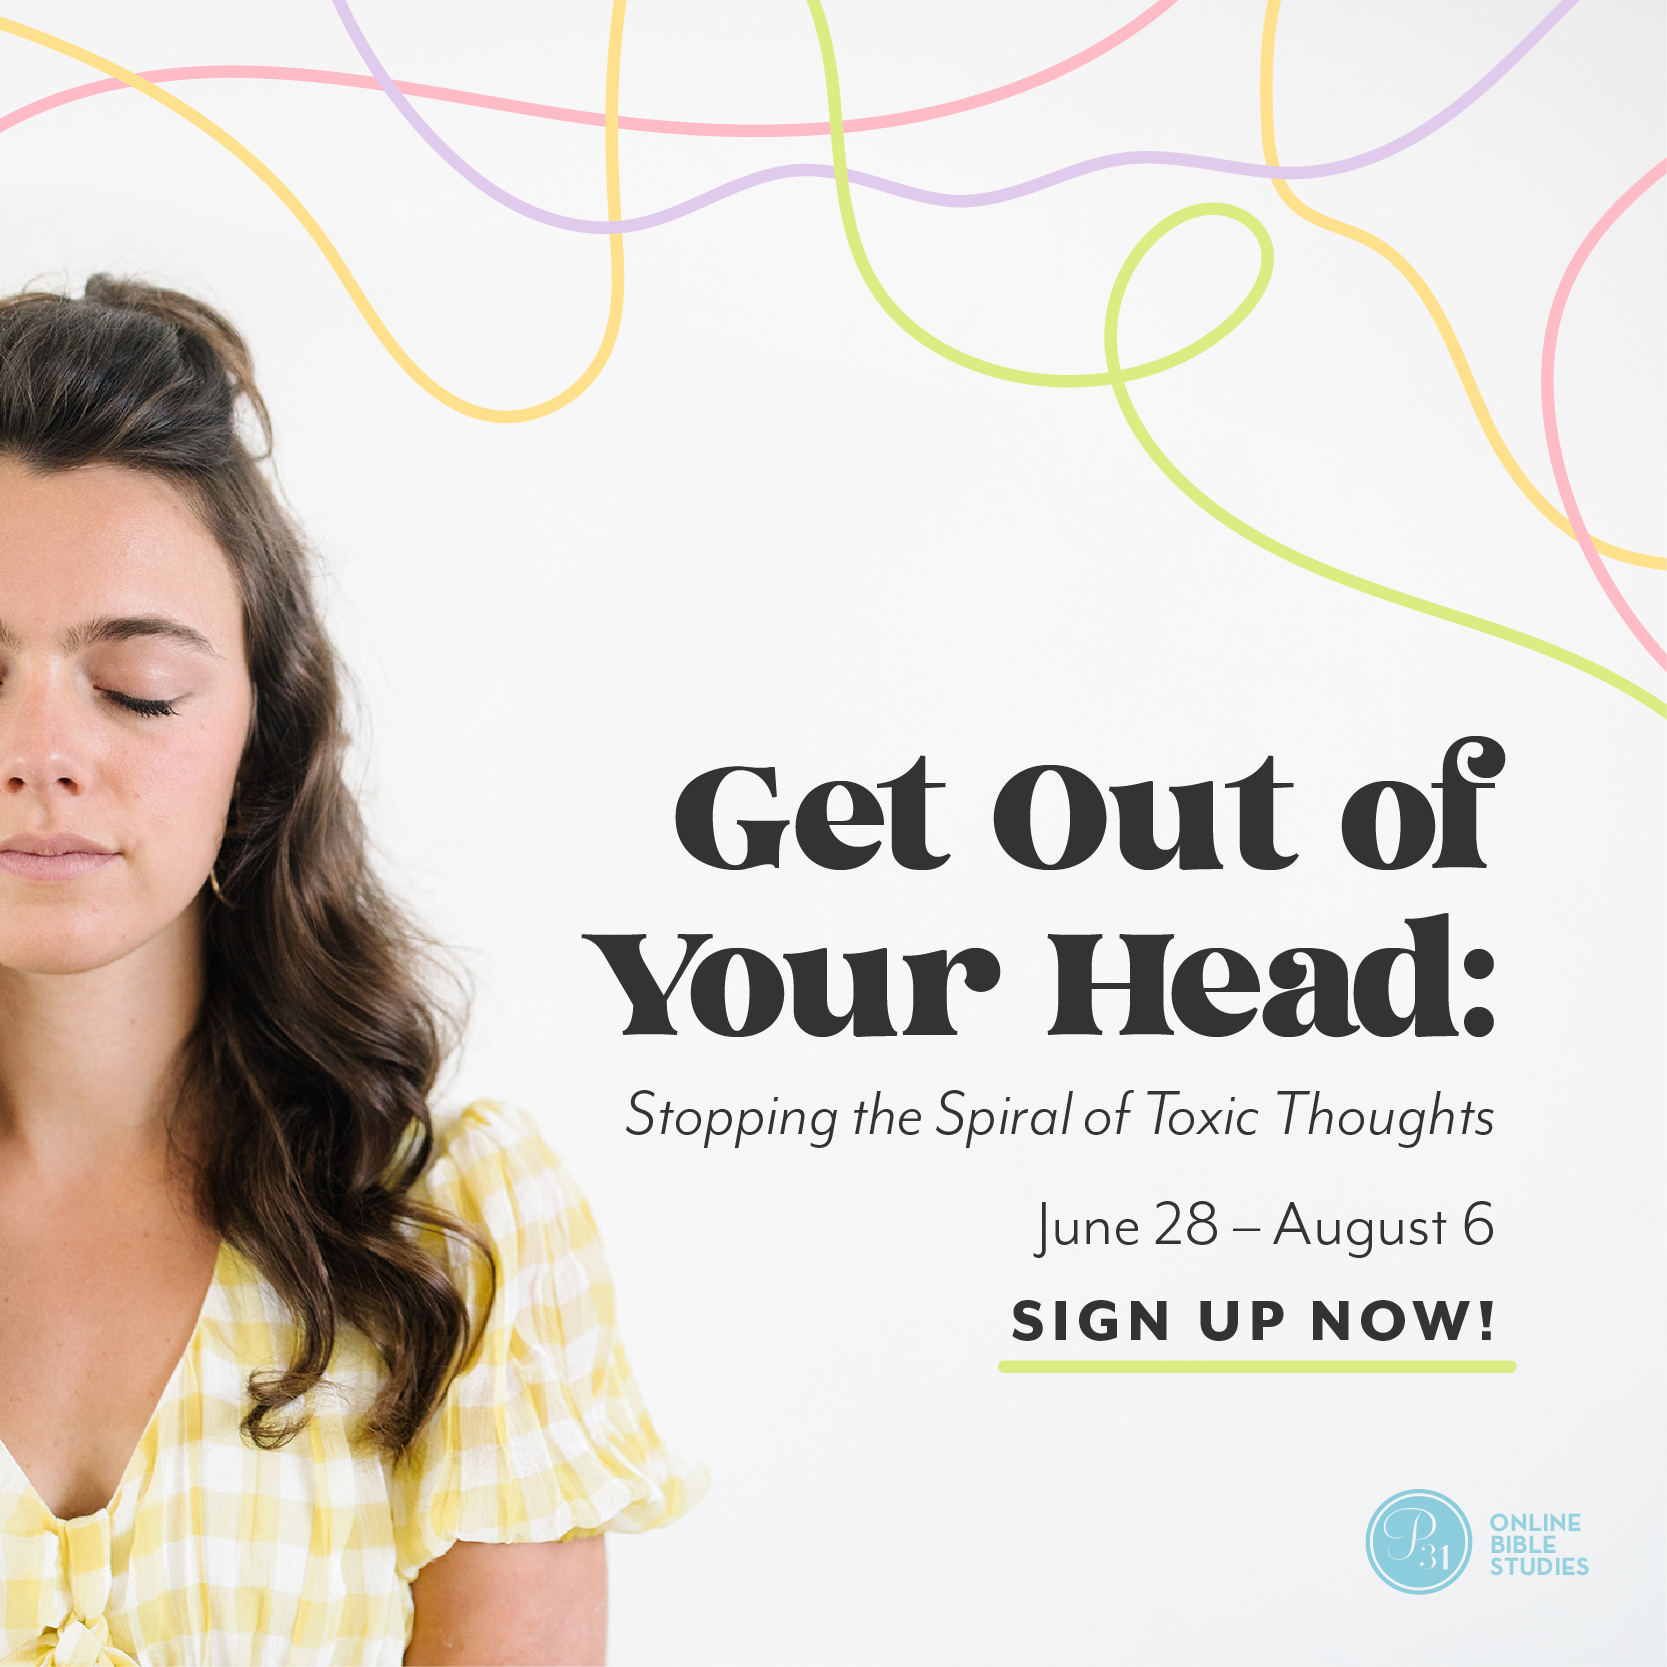 Get Out of Your Head by Jennie Allen | P31 Online Bible Studies